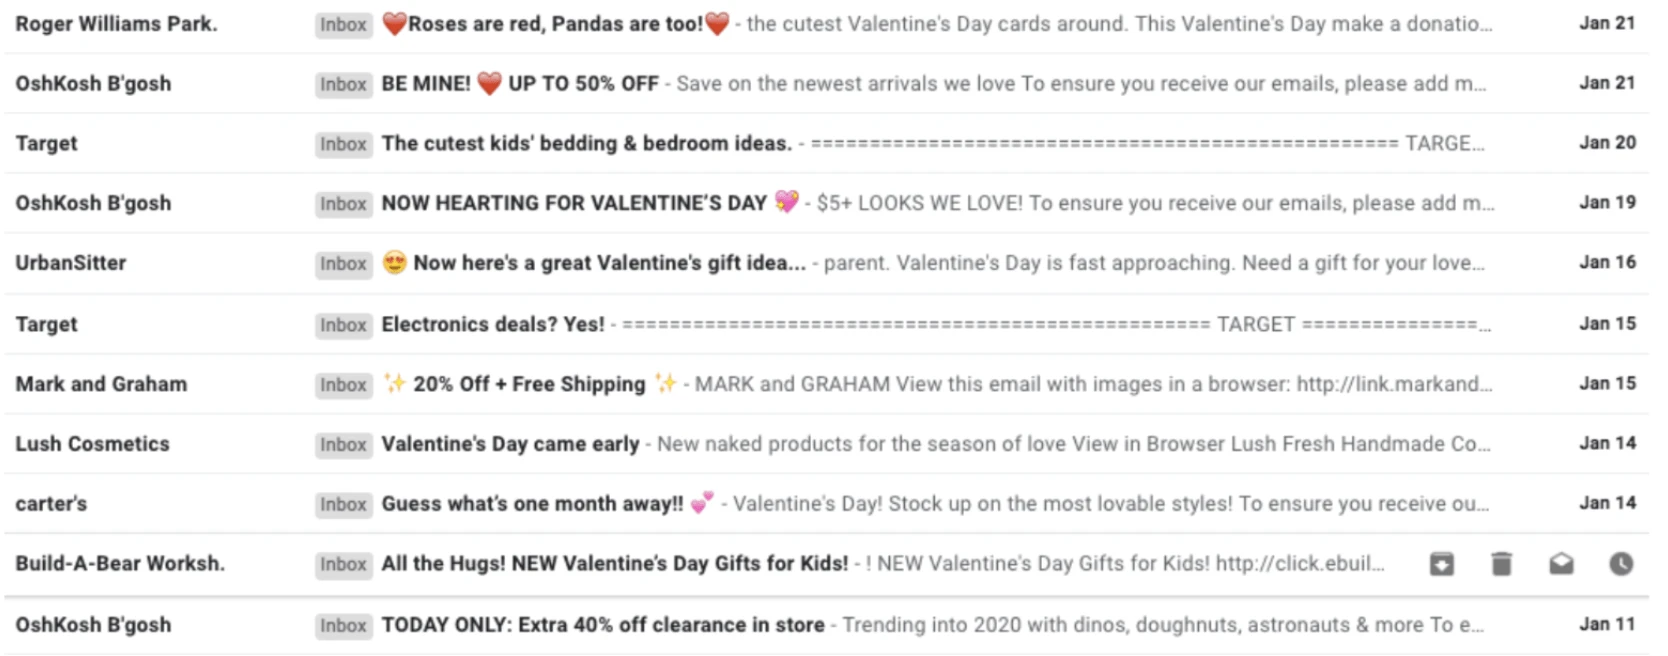 When sending your Valentine’s Day reminder emails